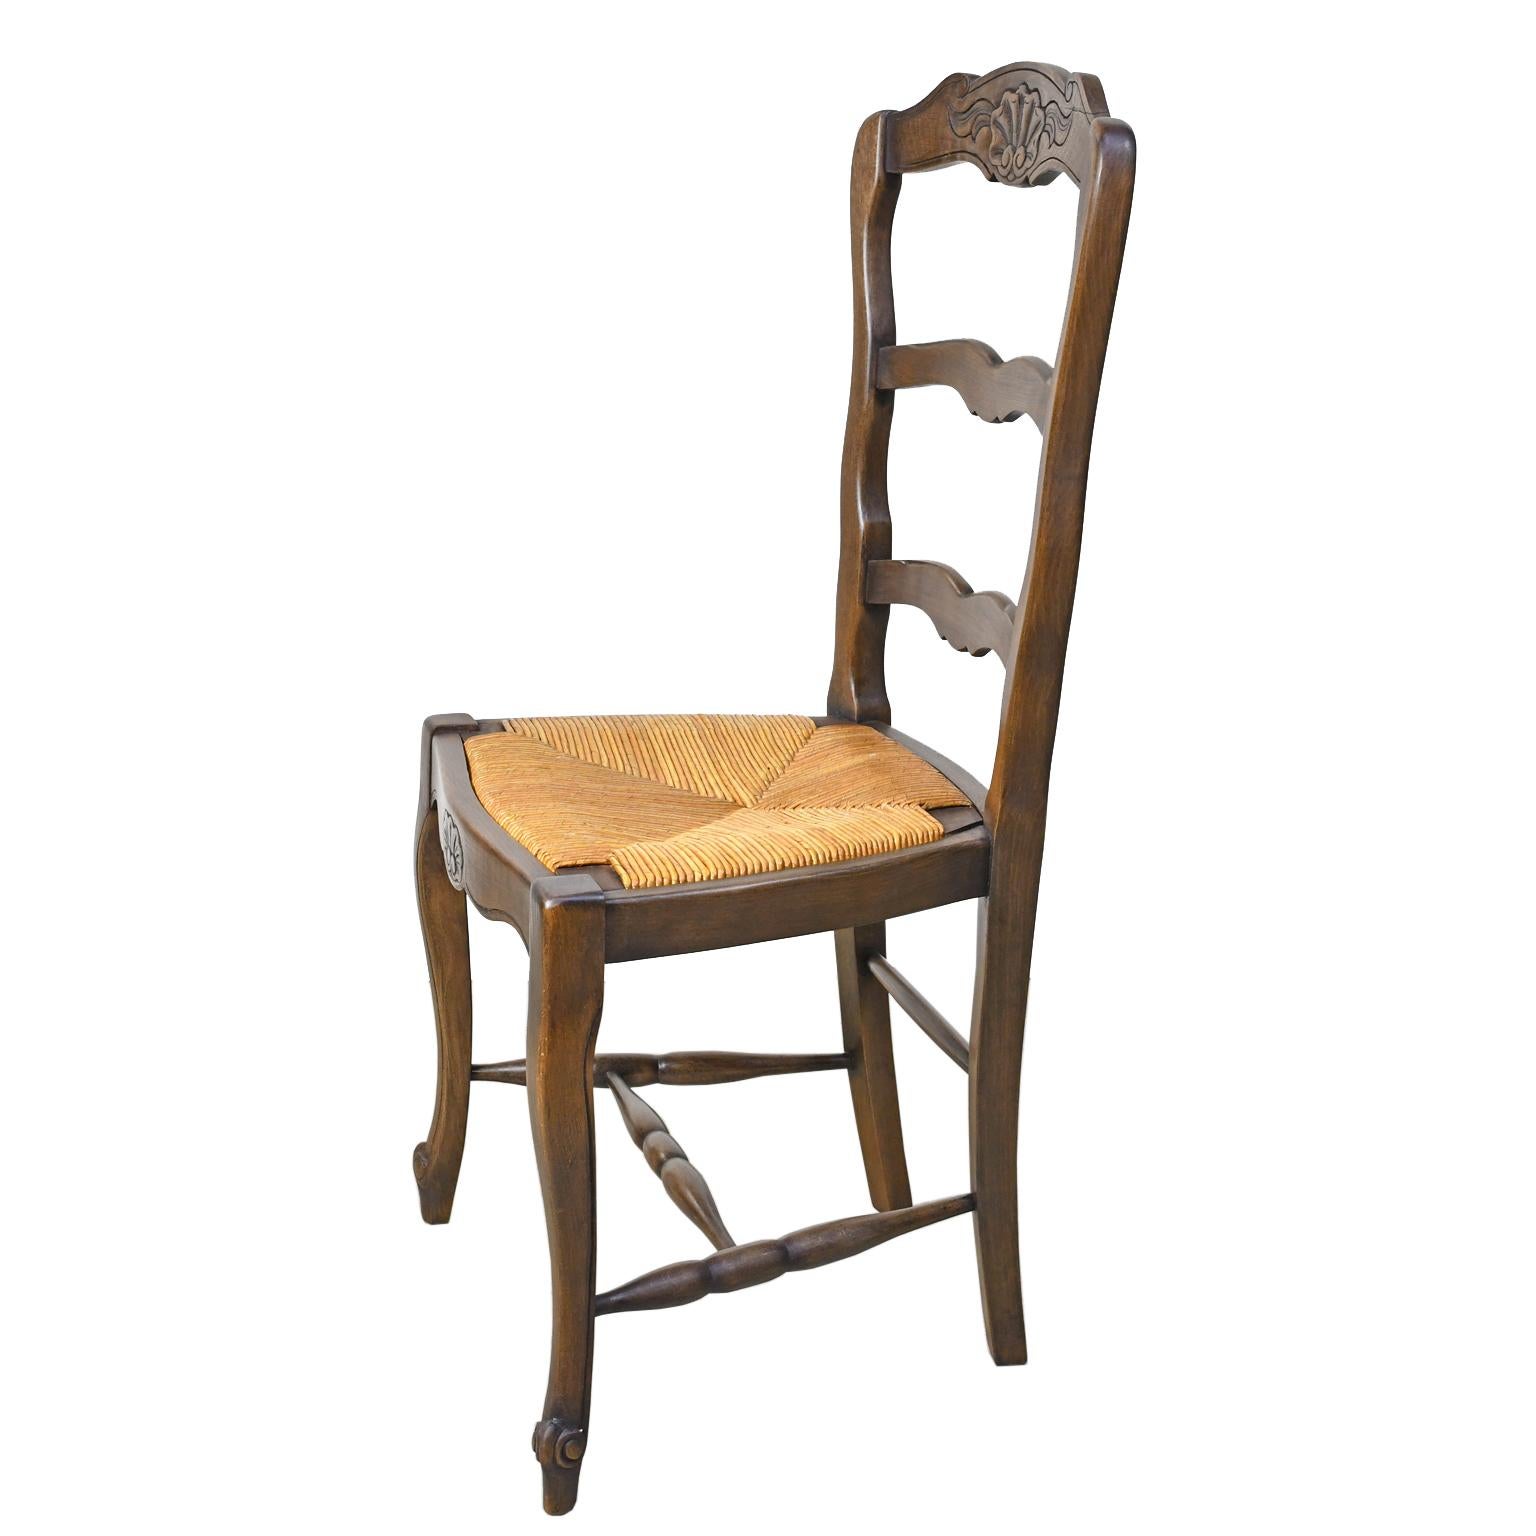 French Provincial Set of 6 Provincial French Ladder Back Chairs, in Walnut Finish, circa 1900-1920